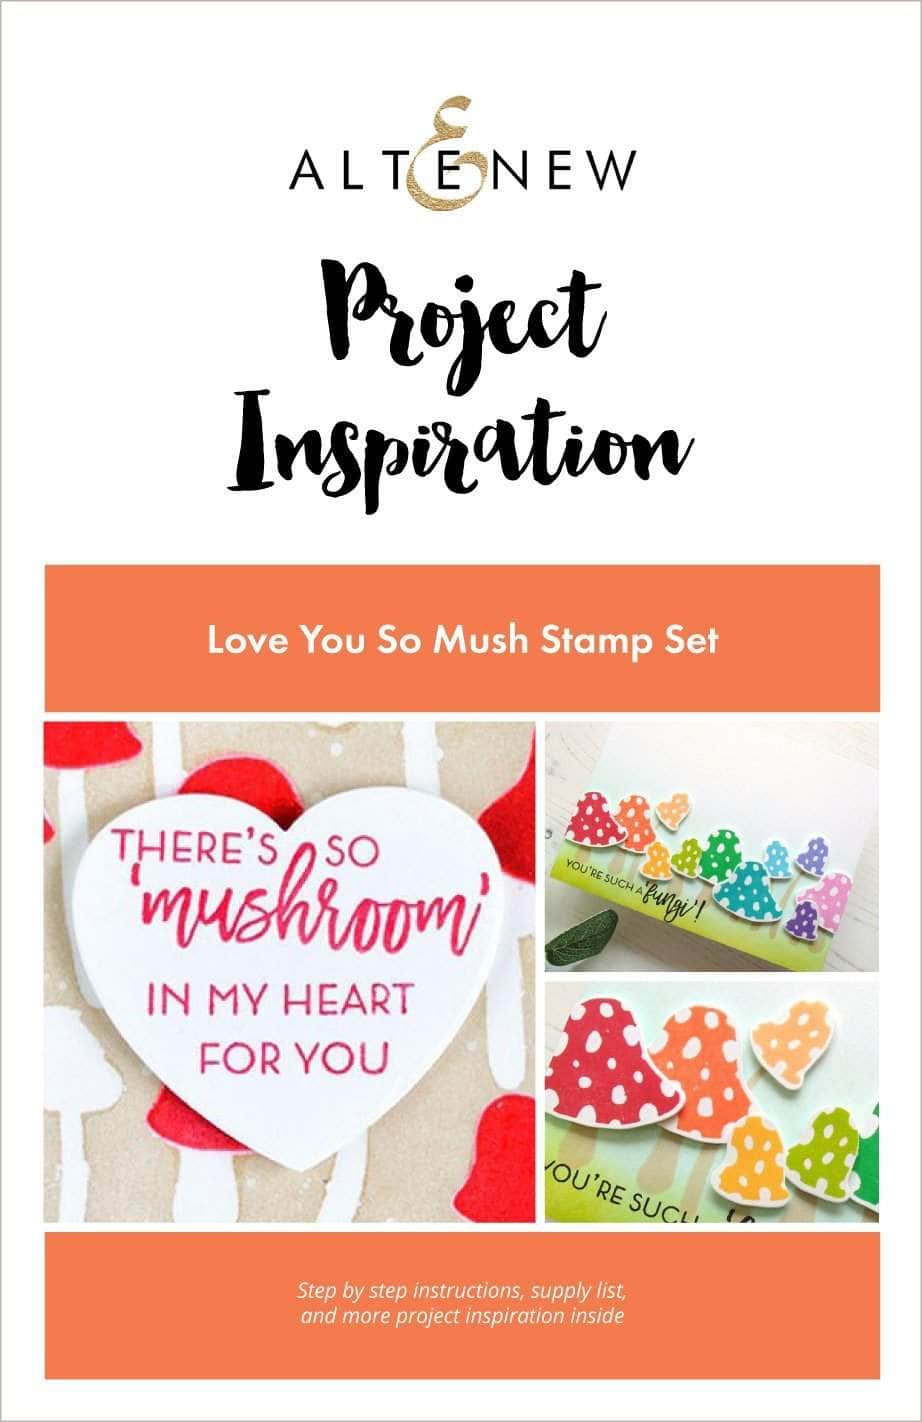 Printed Media Love You So Mush Project Inspiration Guide